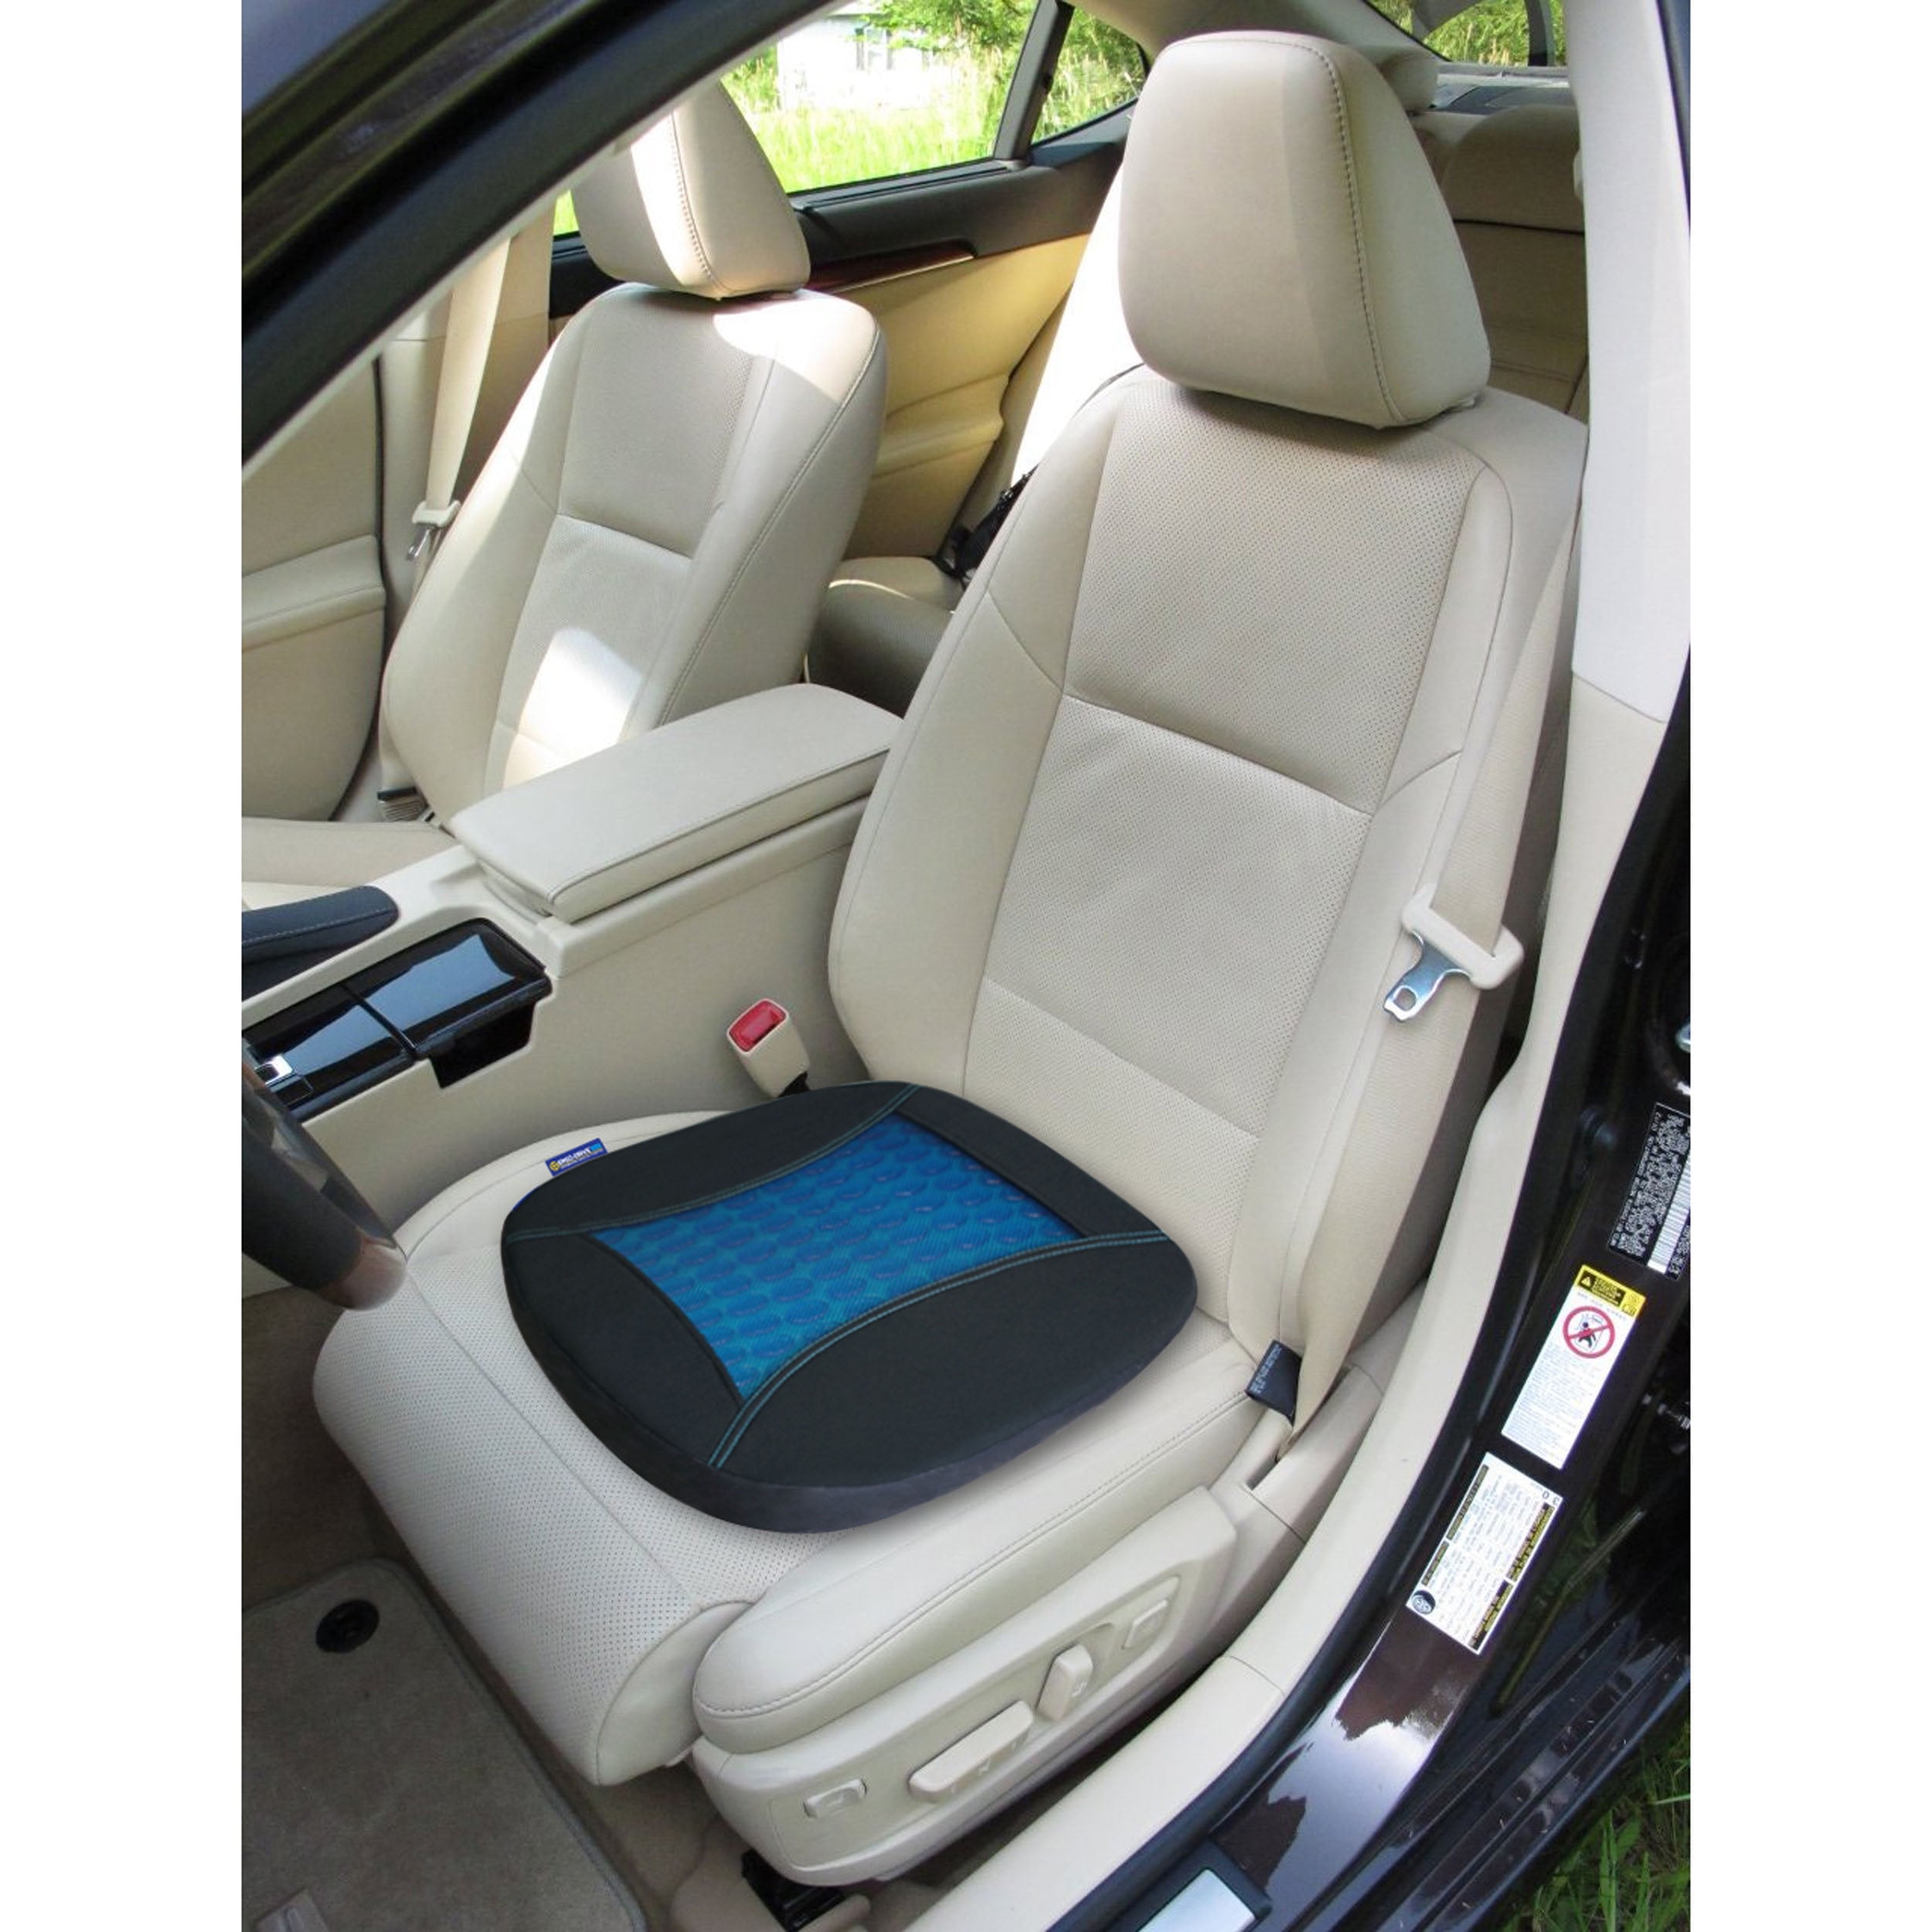 SWISS DRIVE CAR SEAT CUSHION WITH MEMORY FOAM AND COOLING GEL